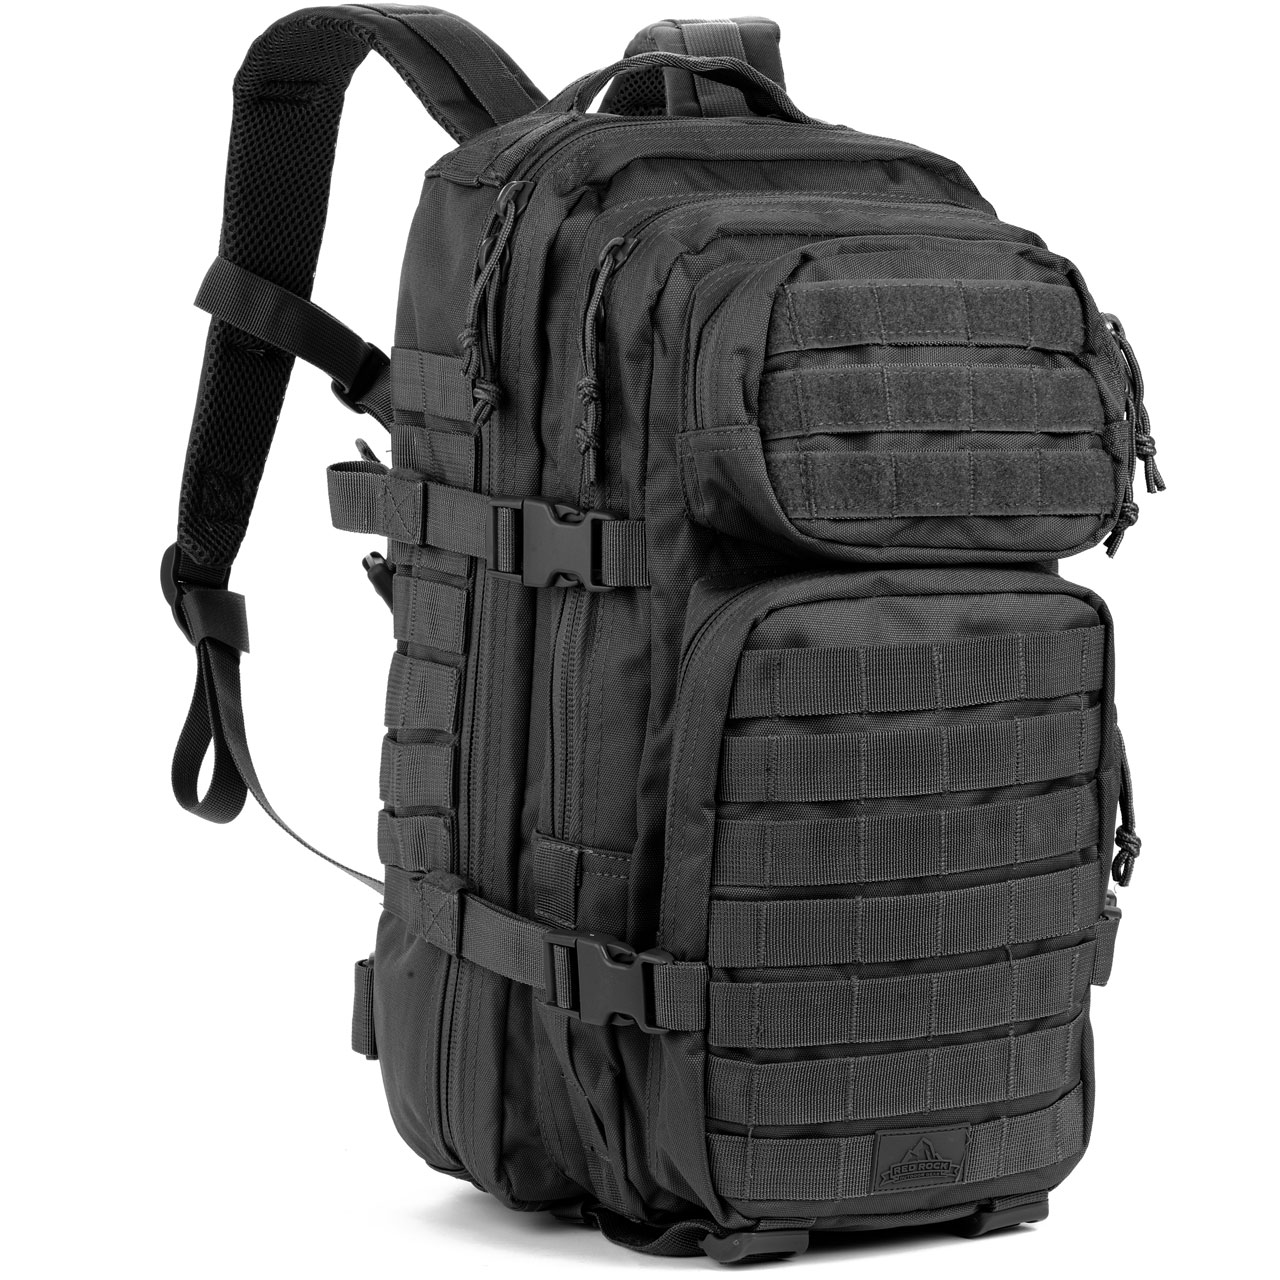 Red Rock Outdoor Gear Assault Backpack | Trail Industries